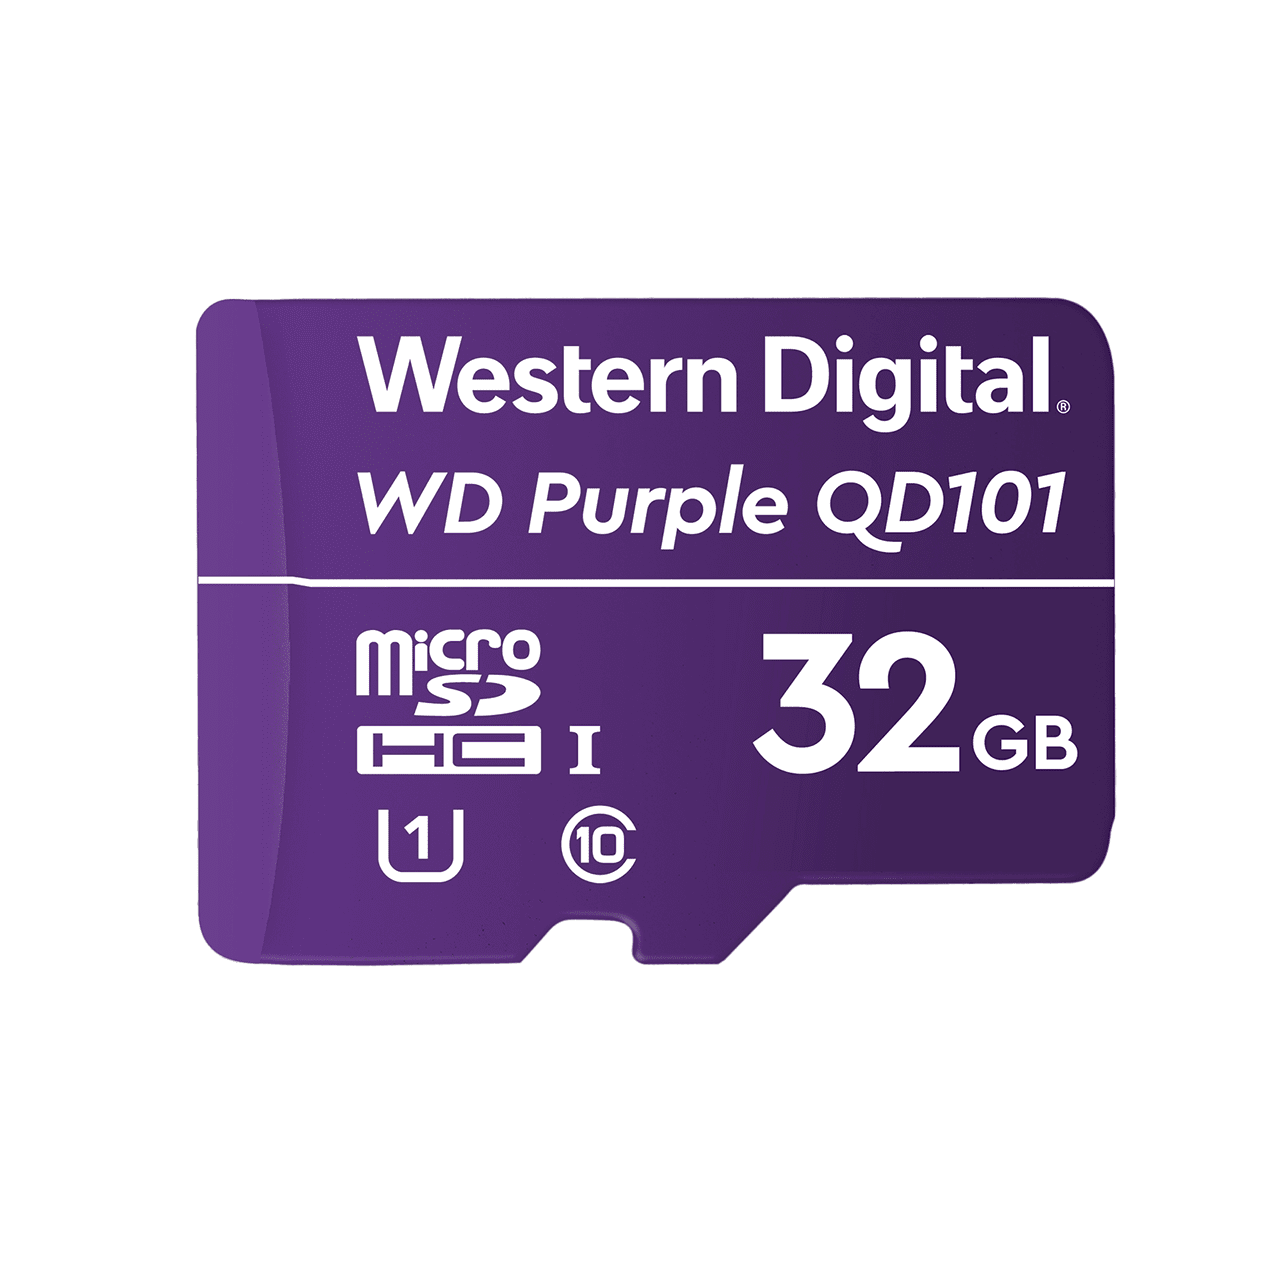 wd-purple-microsd-2020-front-32gb.png.thumb.1280.1280.png